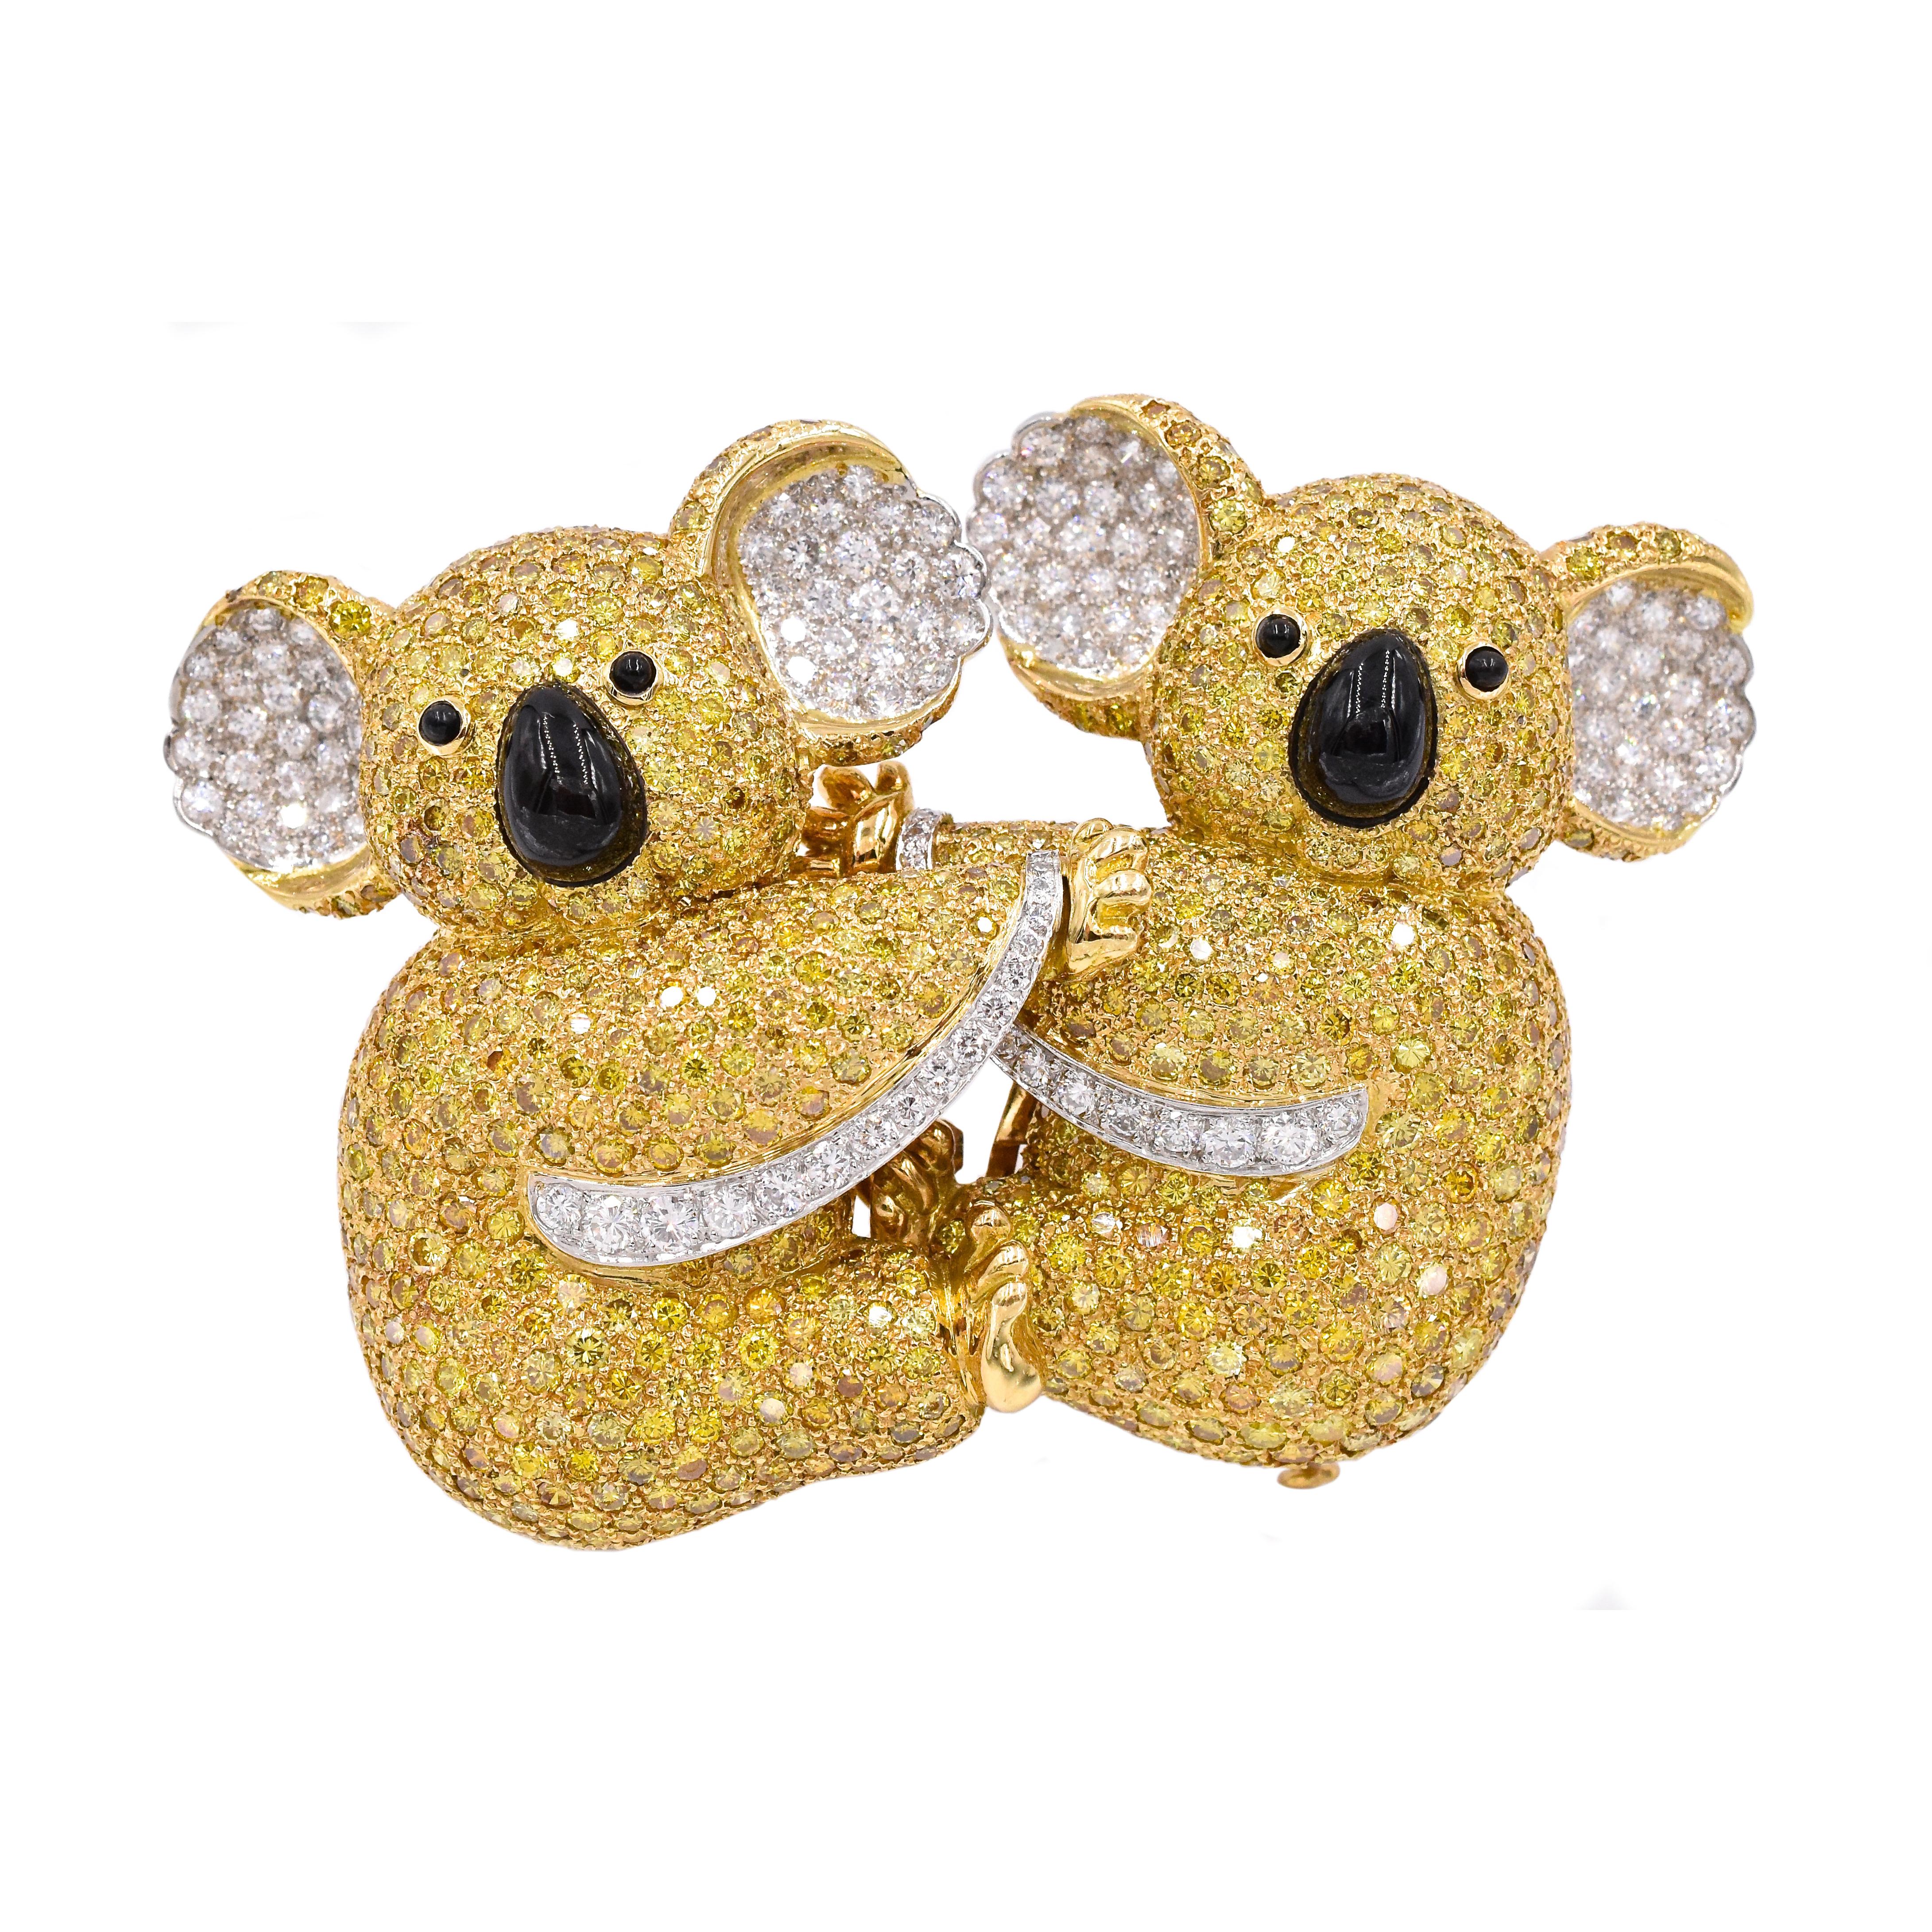 Adorable! Double Koala bear  brooch by Graff!
Fancy yellow & colorless diamonds with estimated weight of 19.75 carats
Yellow diamonds range from fancy yellow to vivid yellow color.
Eyes & nose is set with cabochon onyx.
With makers hallmark: